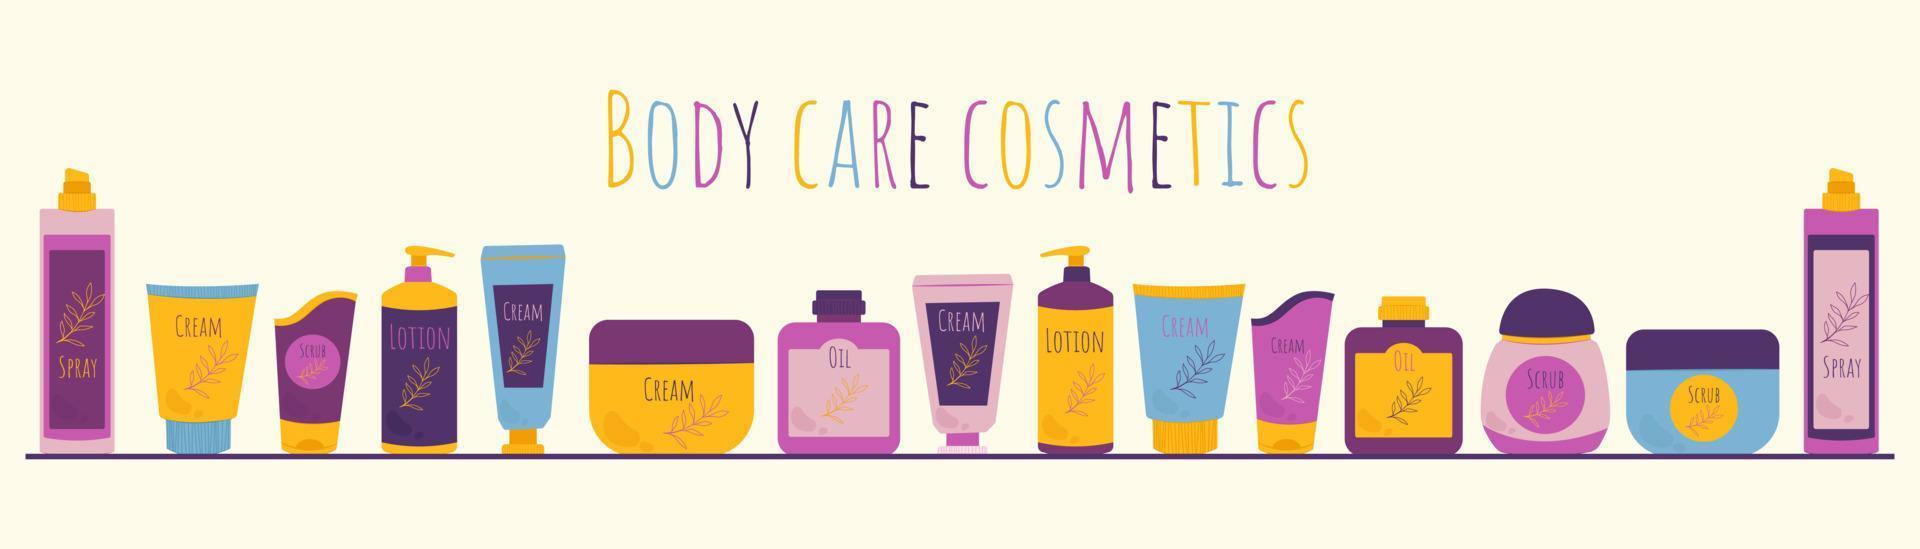 Jars and tubes with cosmetics banner. Body care cosmetics. Vector illustration in flat style.